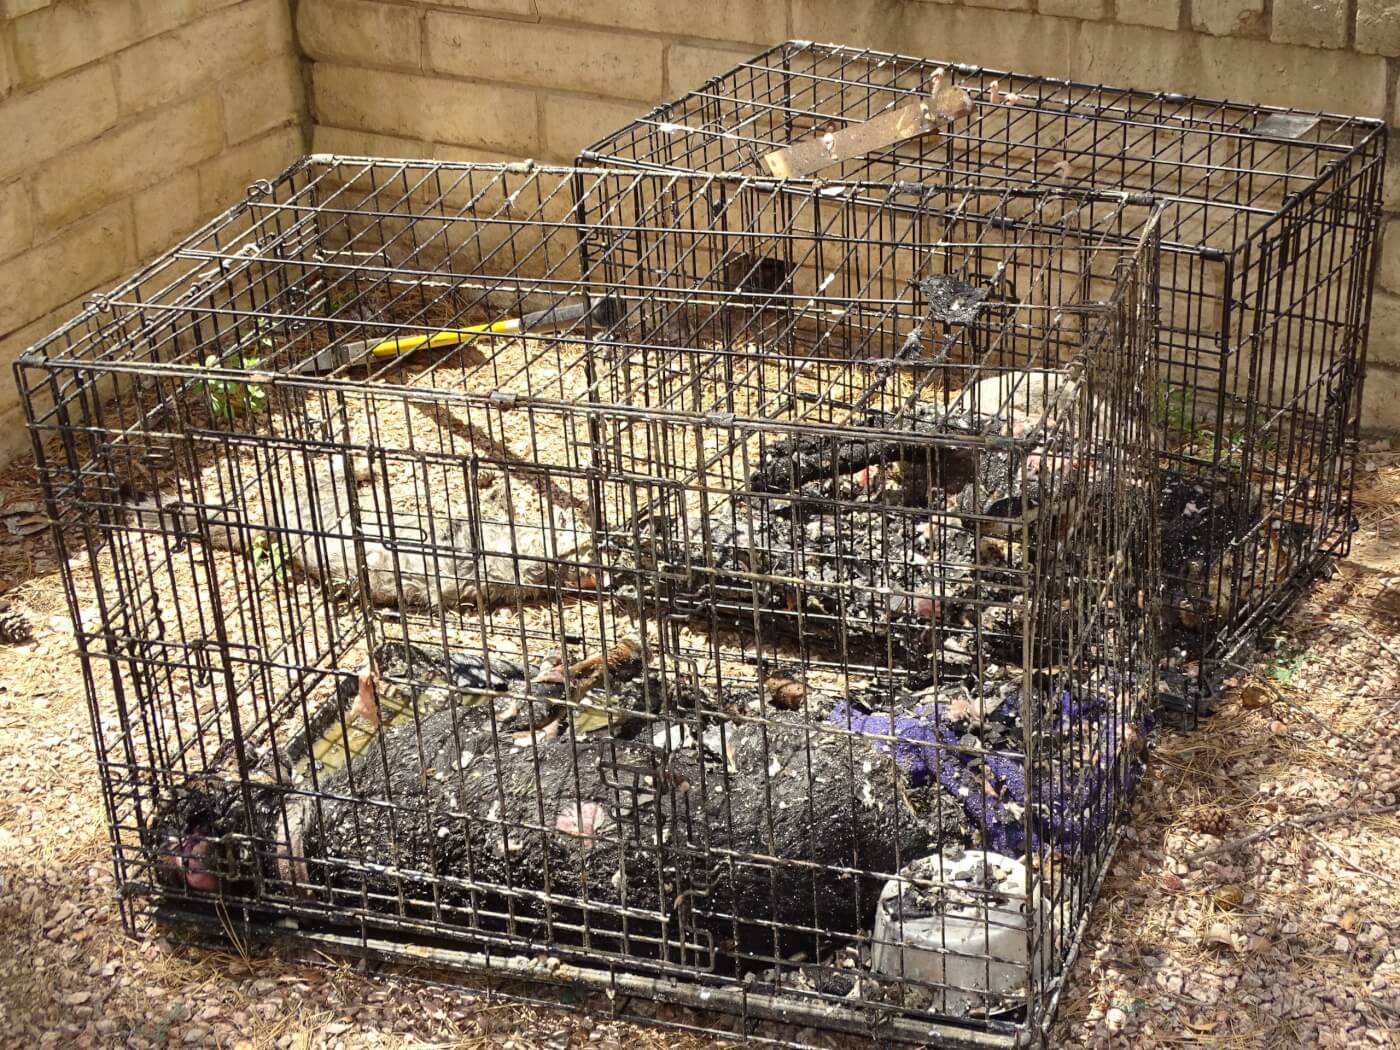 Two wire crates sit side by side with a dead dog in each. A dead cat is positioned next to them.